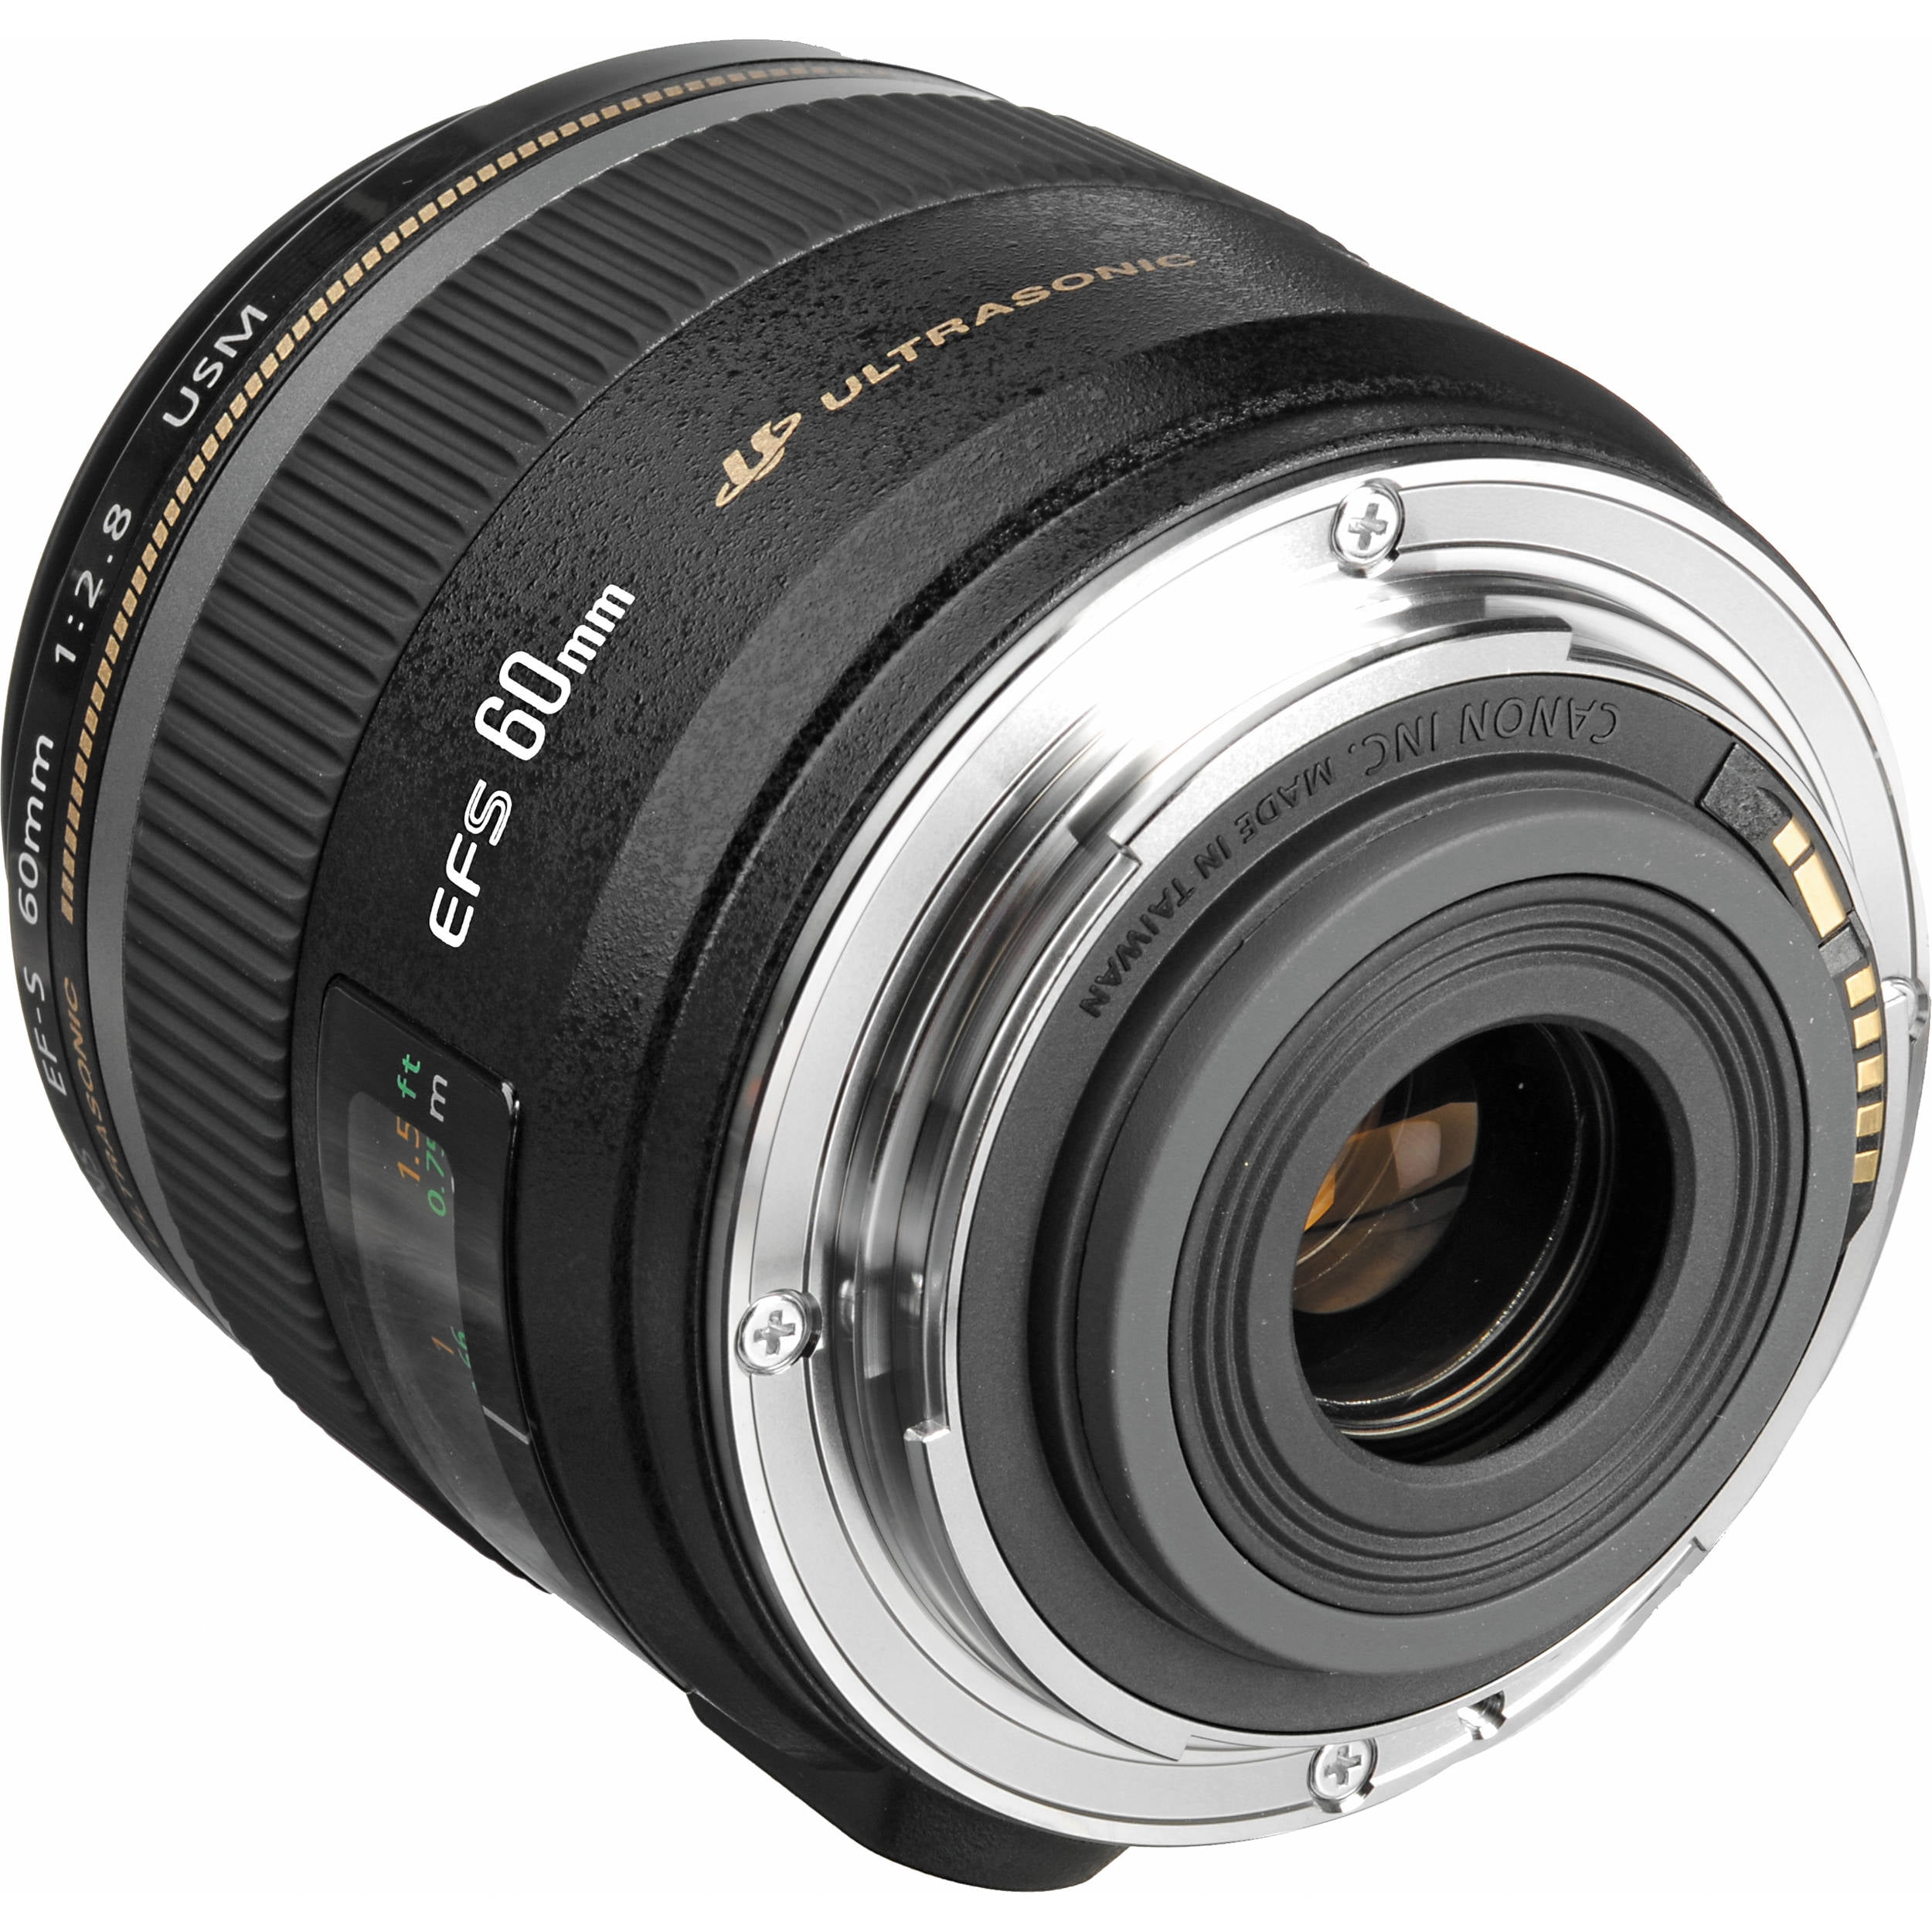 Canon EF-S 60mm f/2.8 Macro USM Fixed Lens for Canon SLR Cameras 